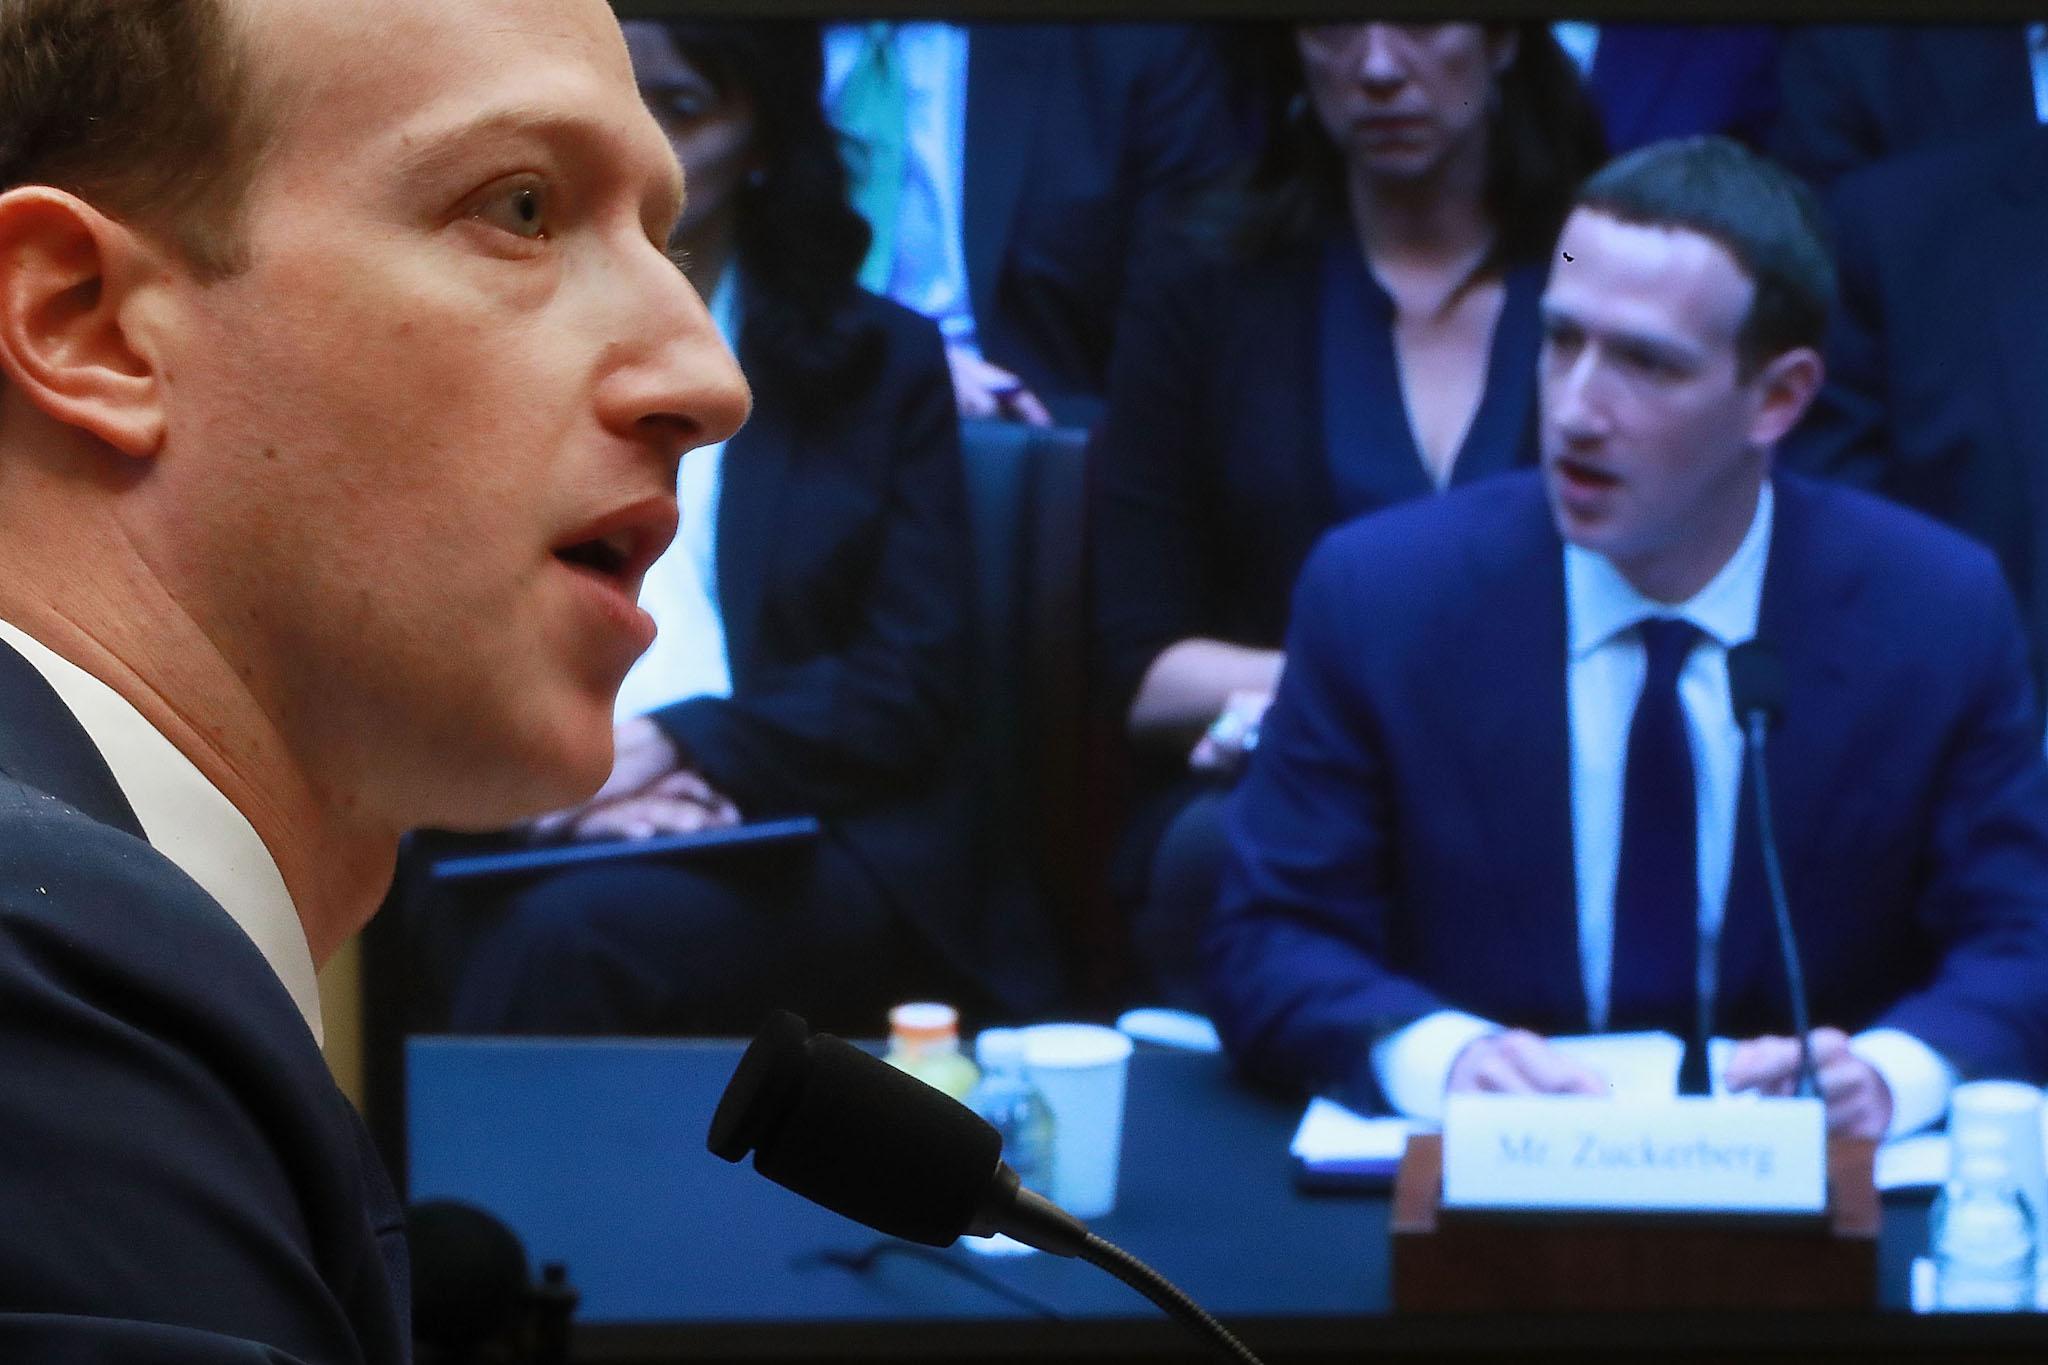 Facebook co-founder, Chairman and CEO Mark Zuckerberg testifies before the House Energy and Commerce Committee in the Rayburn House Office Building